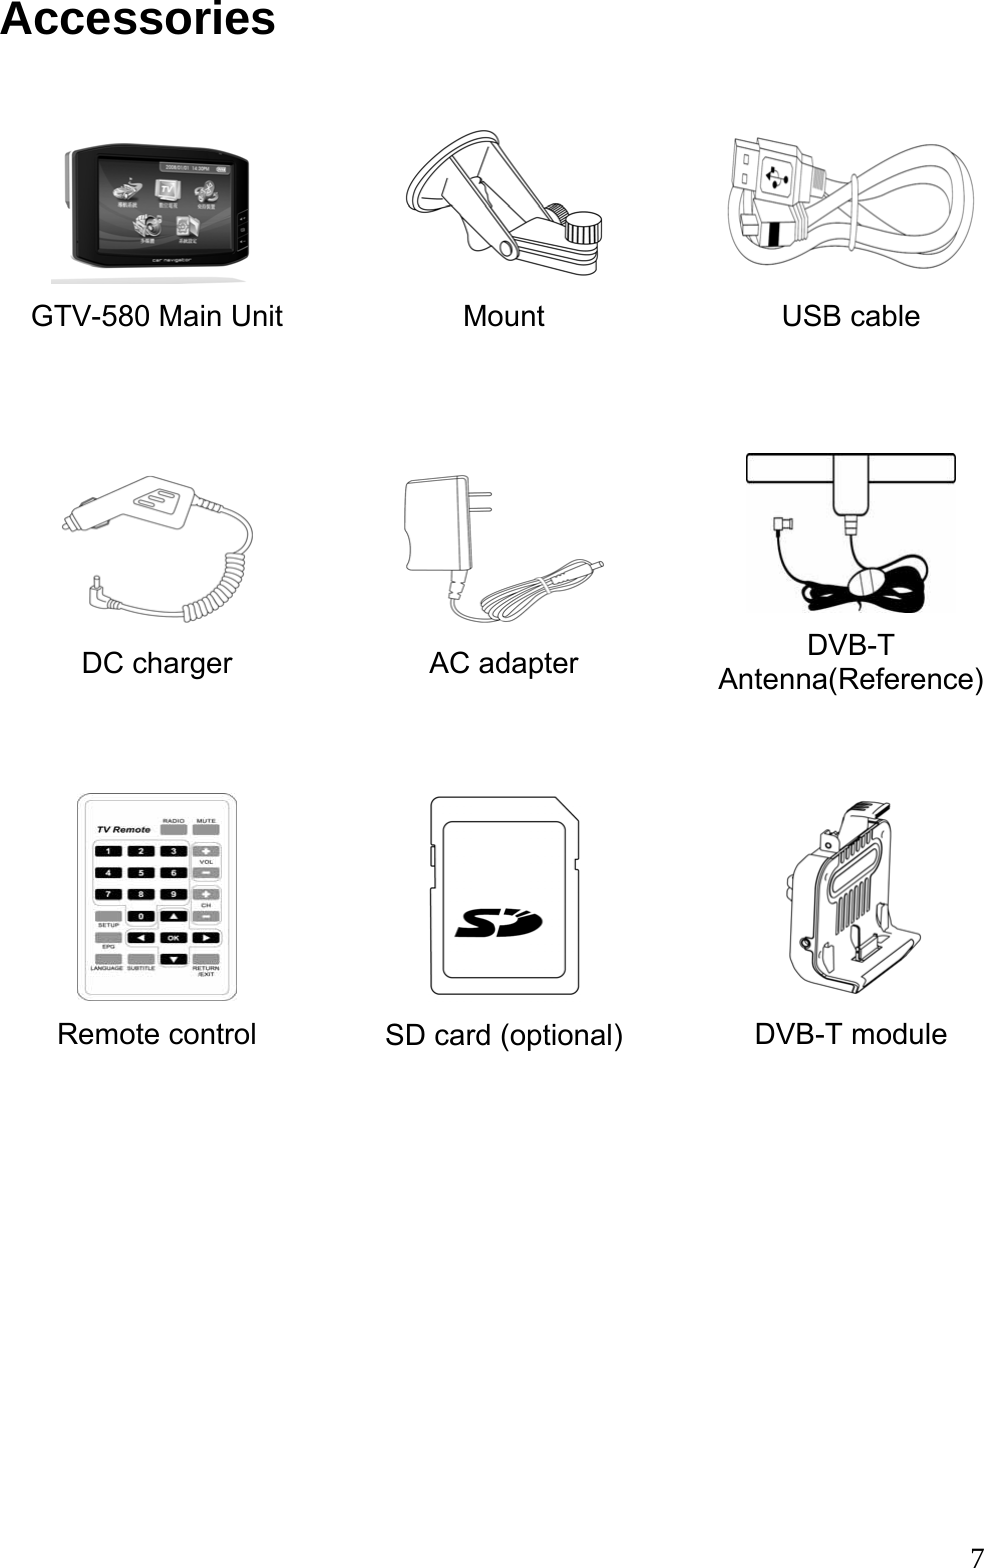  7Accessories  GTV-580 Main Unit  Mount  USB cable  DC charger  AC adapter  DVB-T Antenna(Reference)  Remote control  SD card (optional)  DVB-T module 